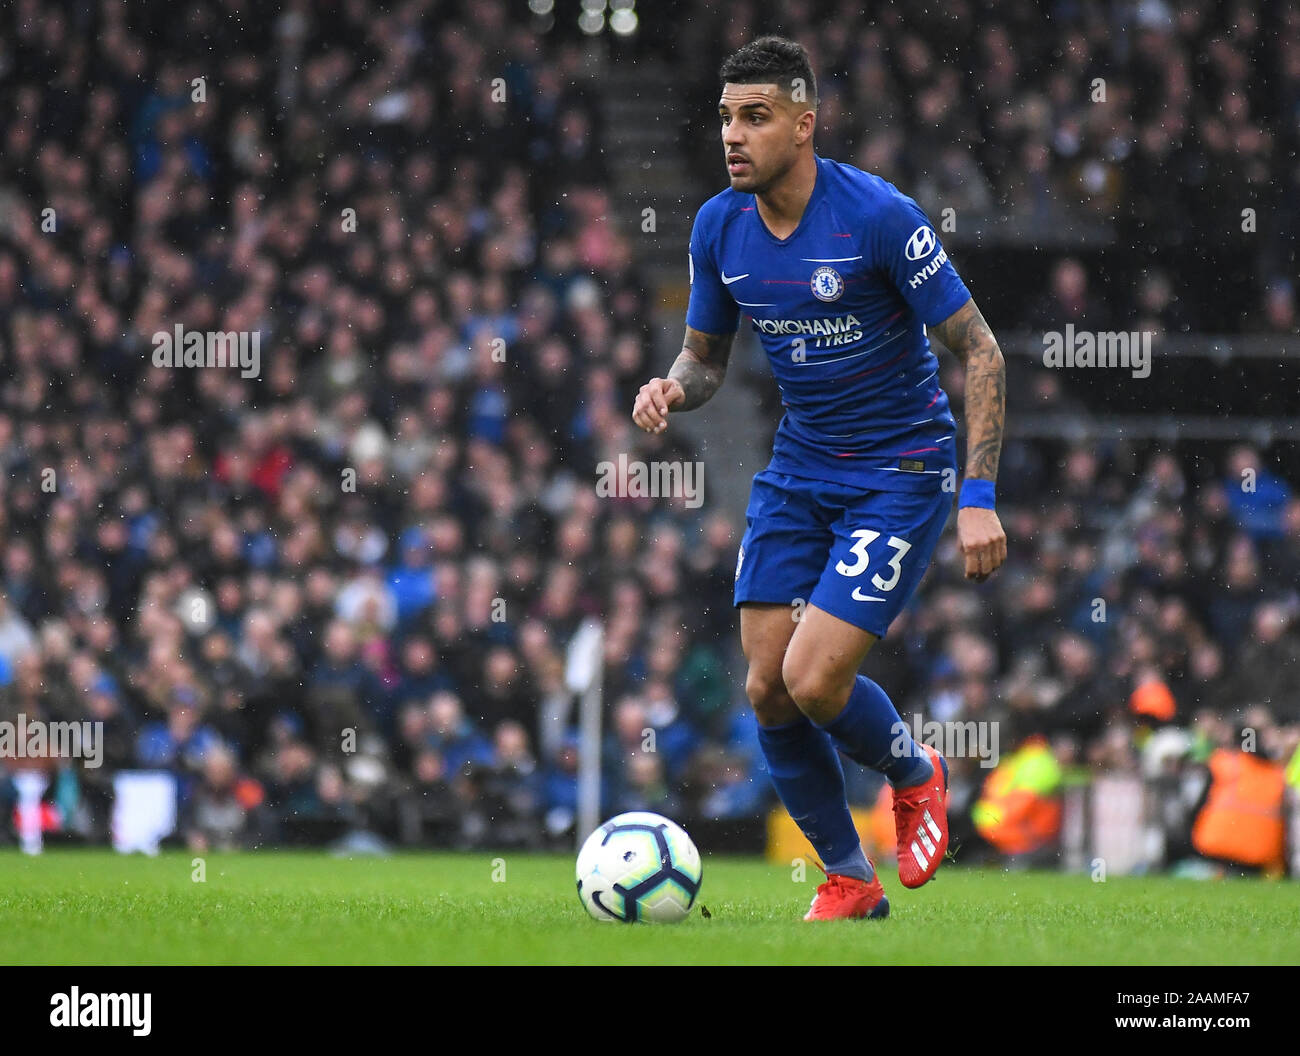 LONDON, ENGLAND - MARCH 3, 2019: Emerson Palmieri dos Santos of Chelsea pictured during the 2018/19 Premier League game between Fulham FC and Chelsea FC at Craven Cottage. Stock Photo